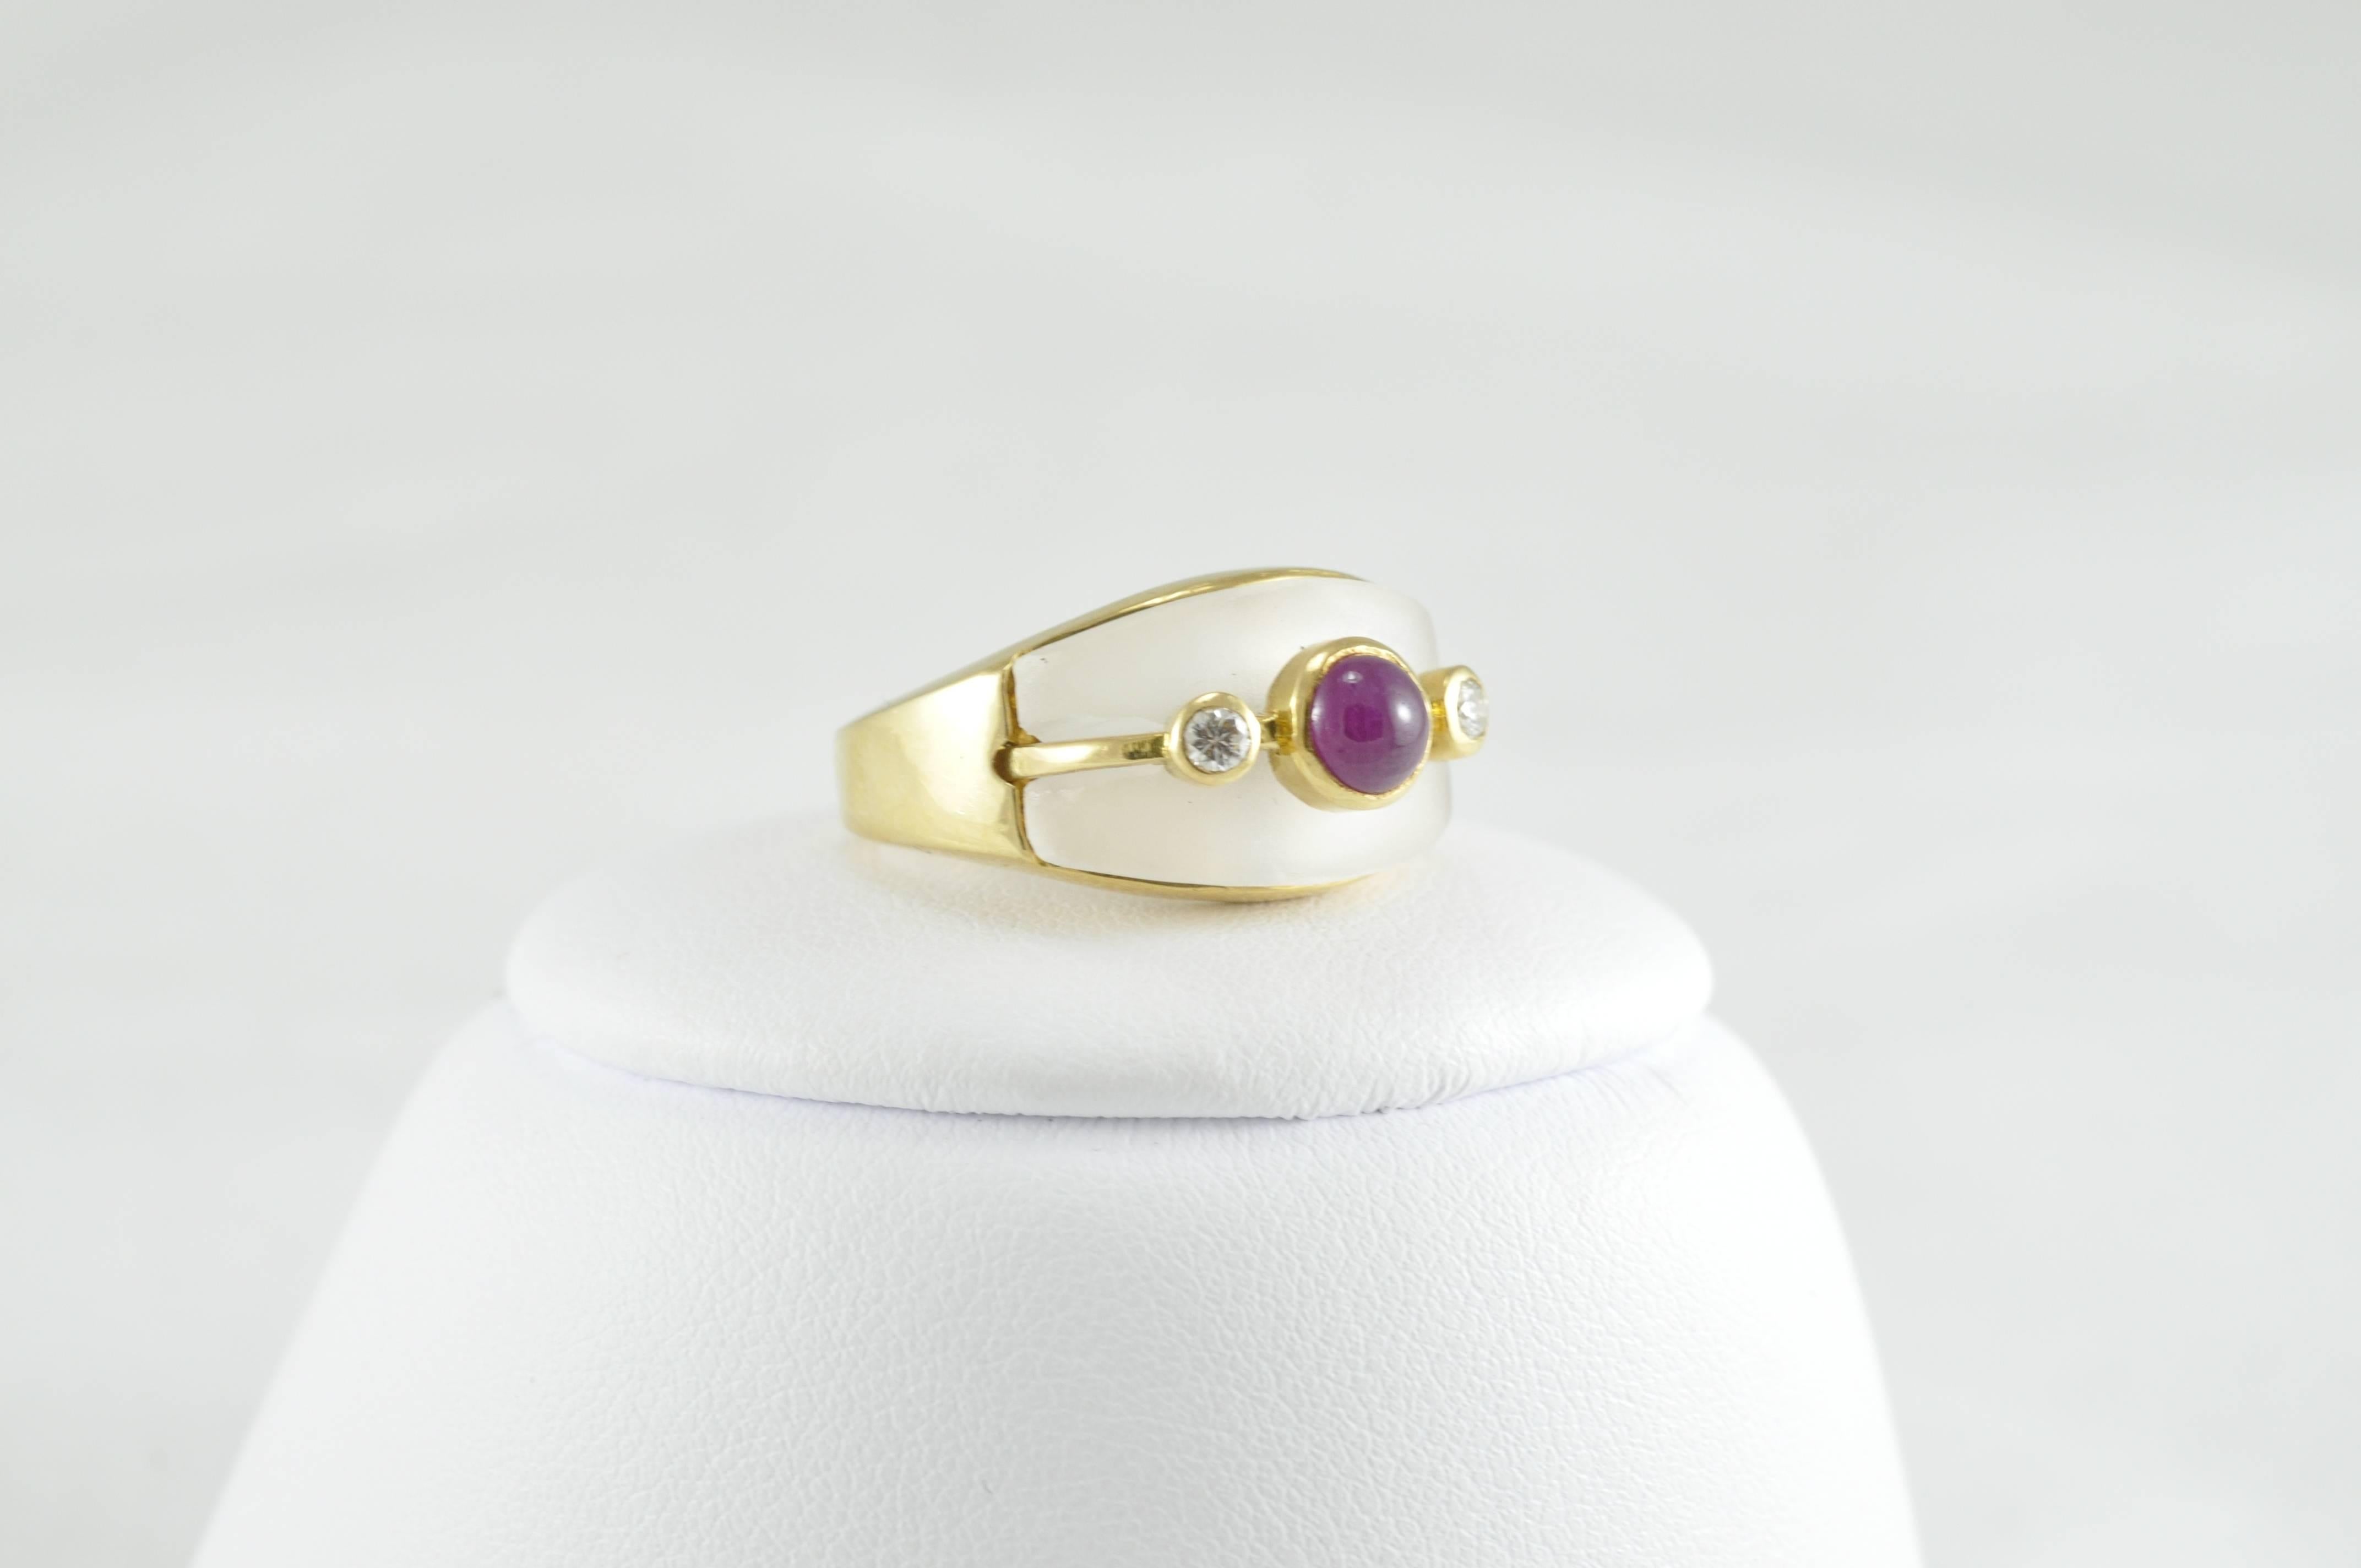 18k Yellow Gold LaLaounis Cabochon Ruby Ring with frosted crystal and two Round Diamonds.
The ring is stamped A21750 and GREECE with a trademark stamp.
The item is currently just on the small side of size 6.75, but can be sized to fit your needs.